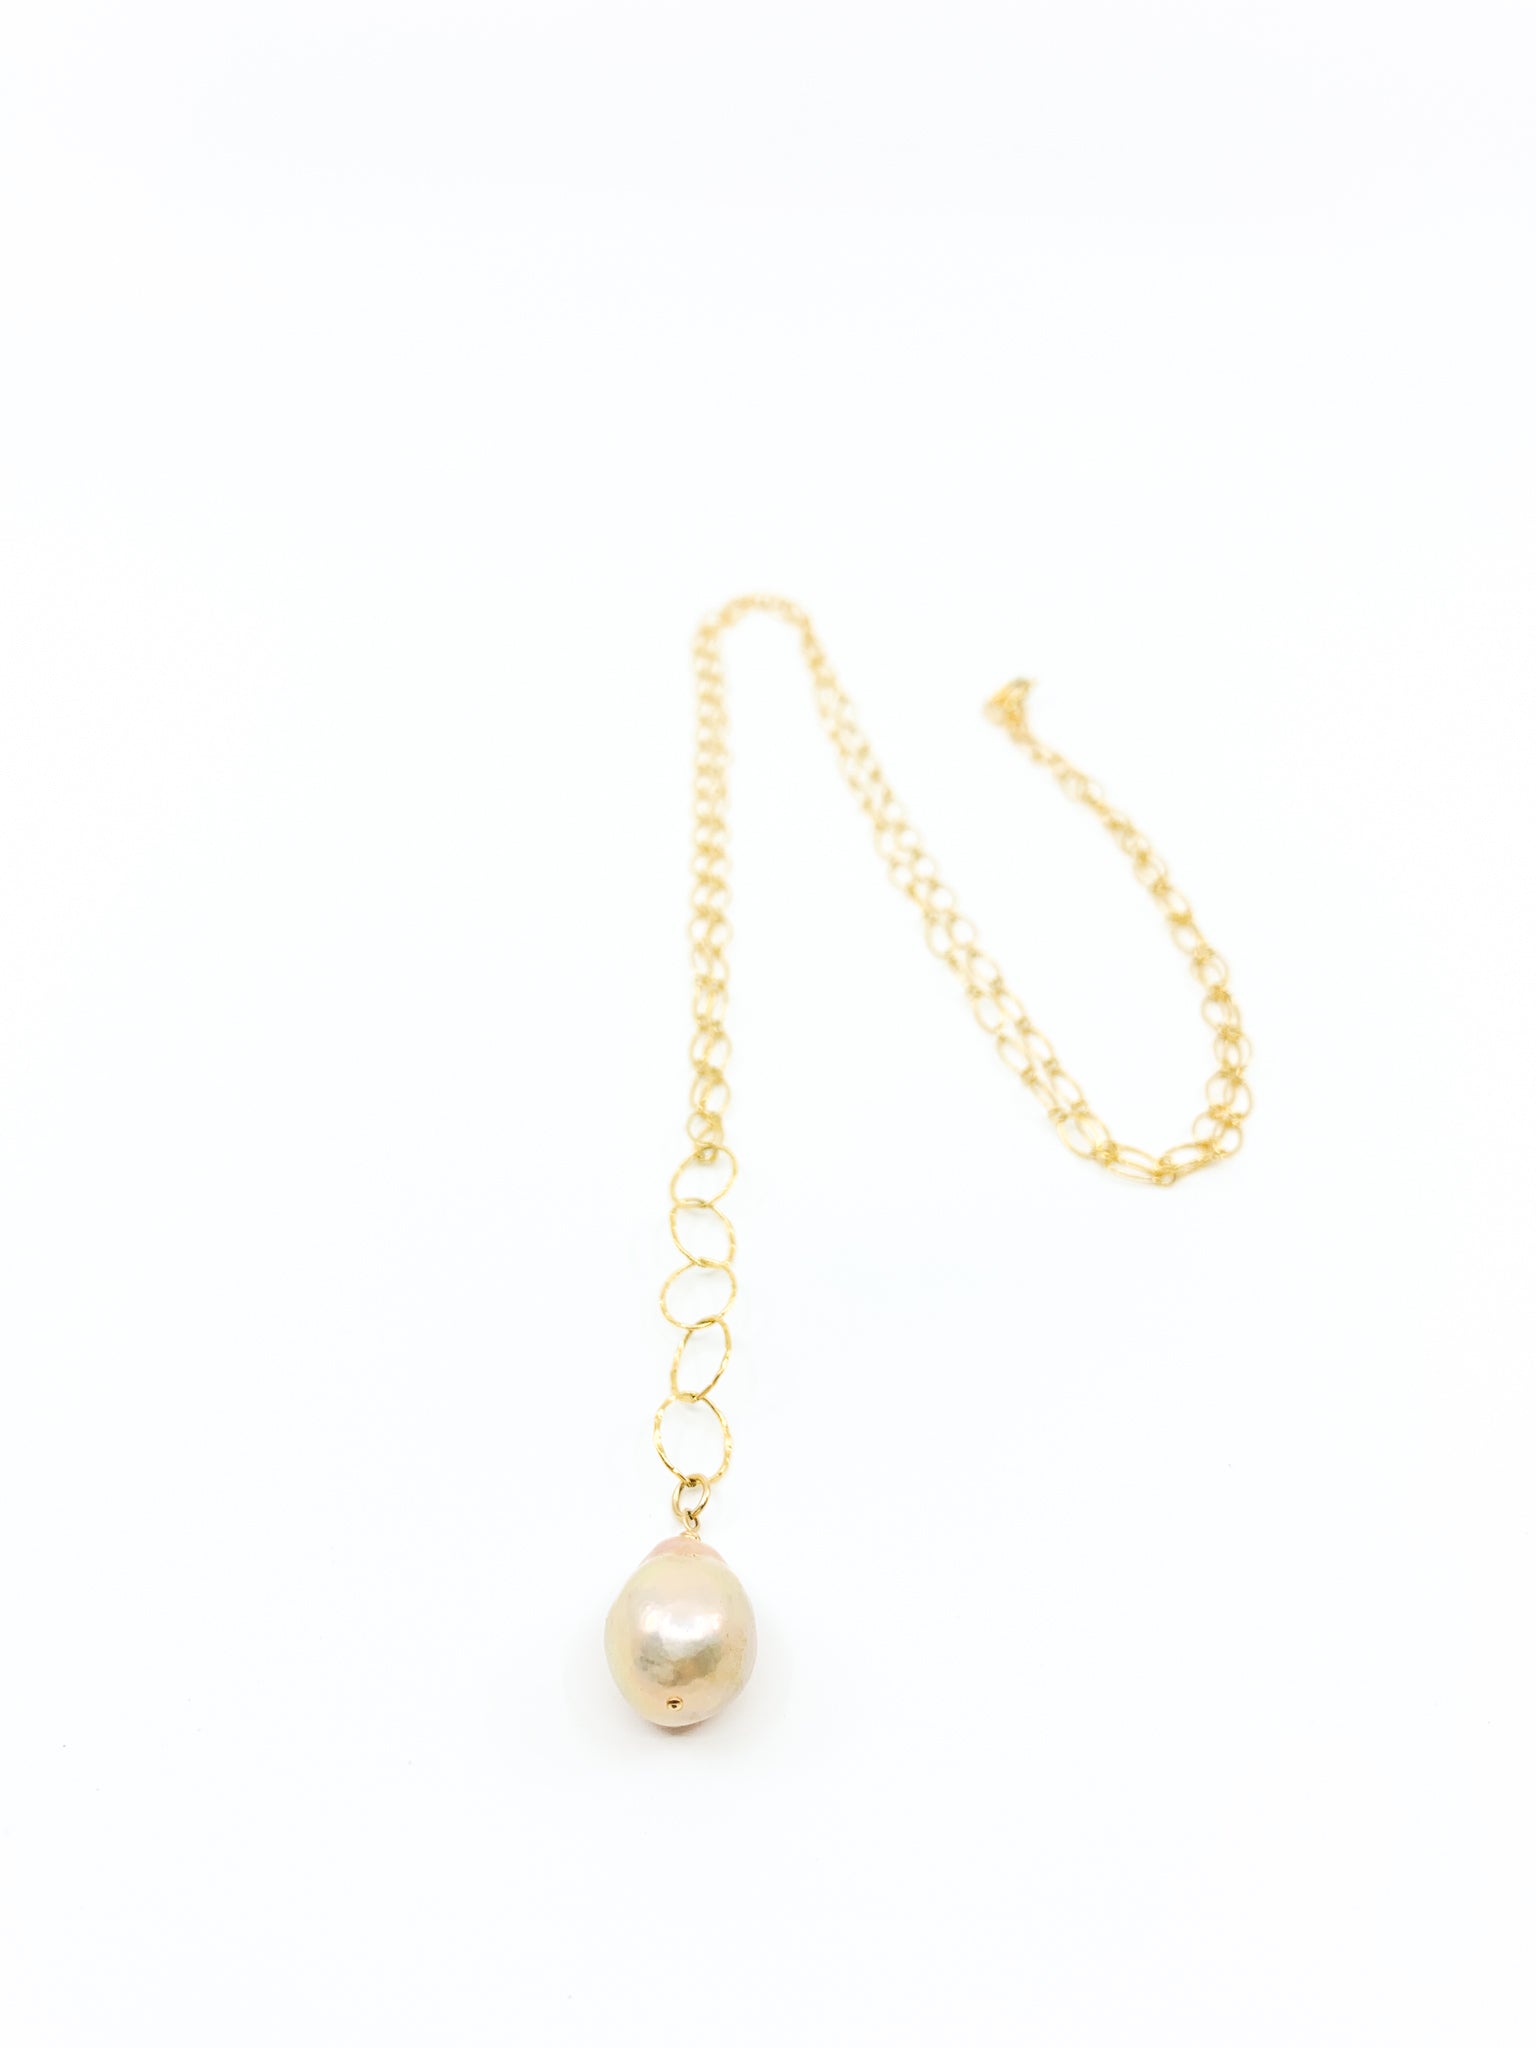 natural pink pearl long gold necklace by eve black jewelry made in Hawaii